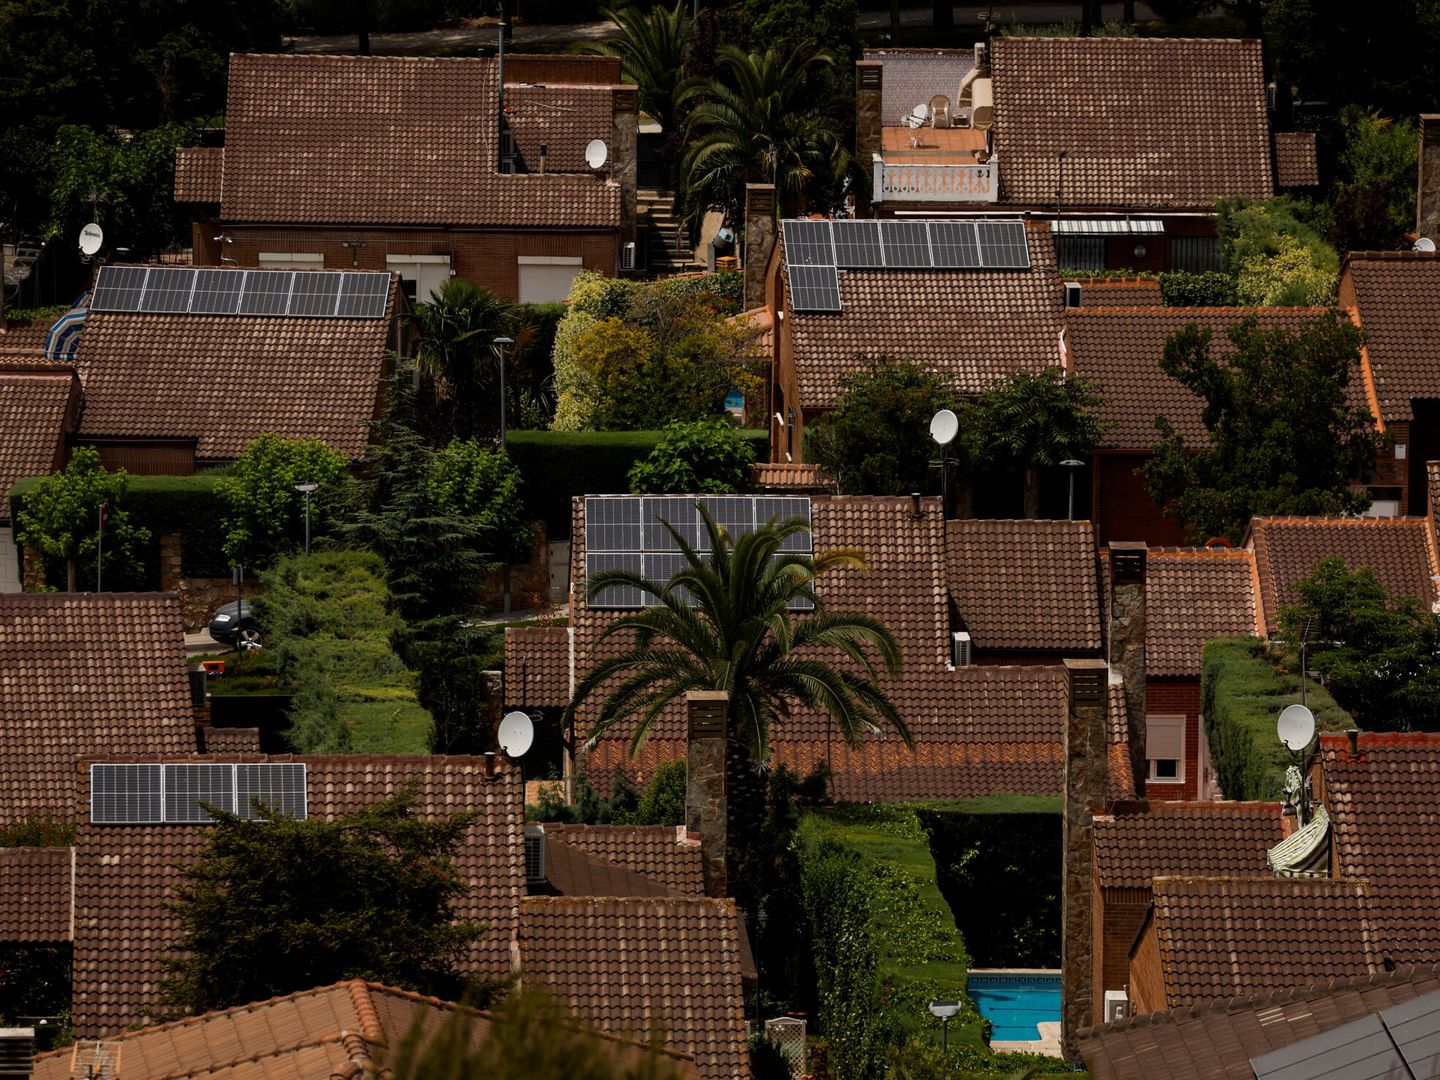 Solar panels are seen on the roofs of homes at the well-to-do suburb of Rivas-Vaciamadrid, south of Madrid, Spain, June 6, 2022. Picture taken June 6, 2022. REUTERS Susana Vera